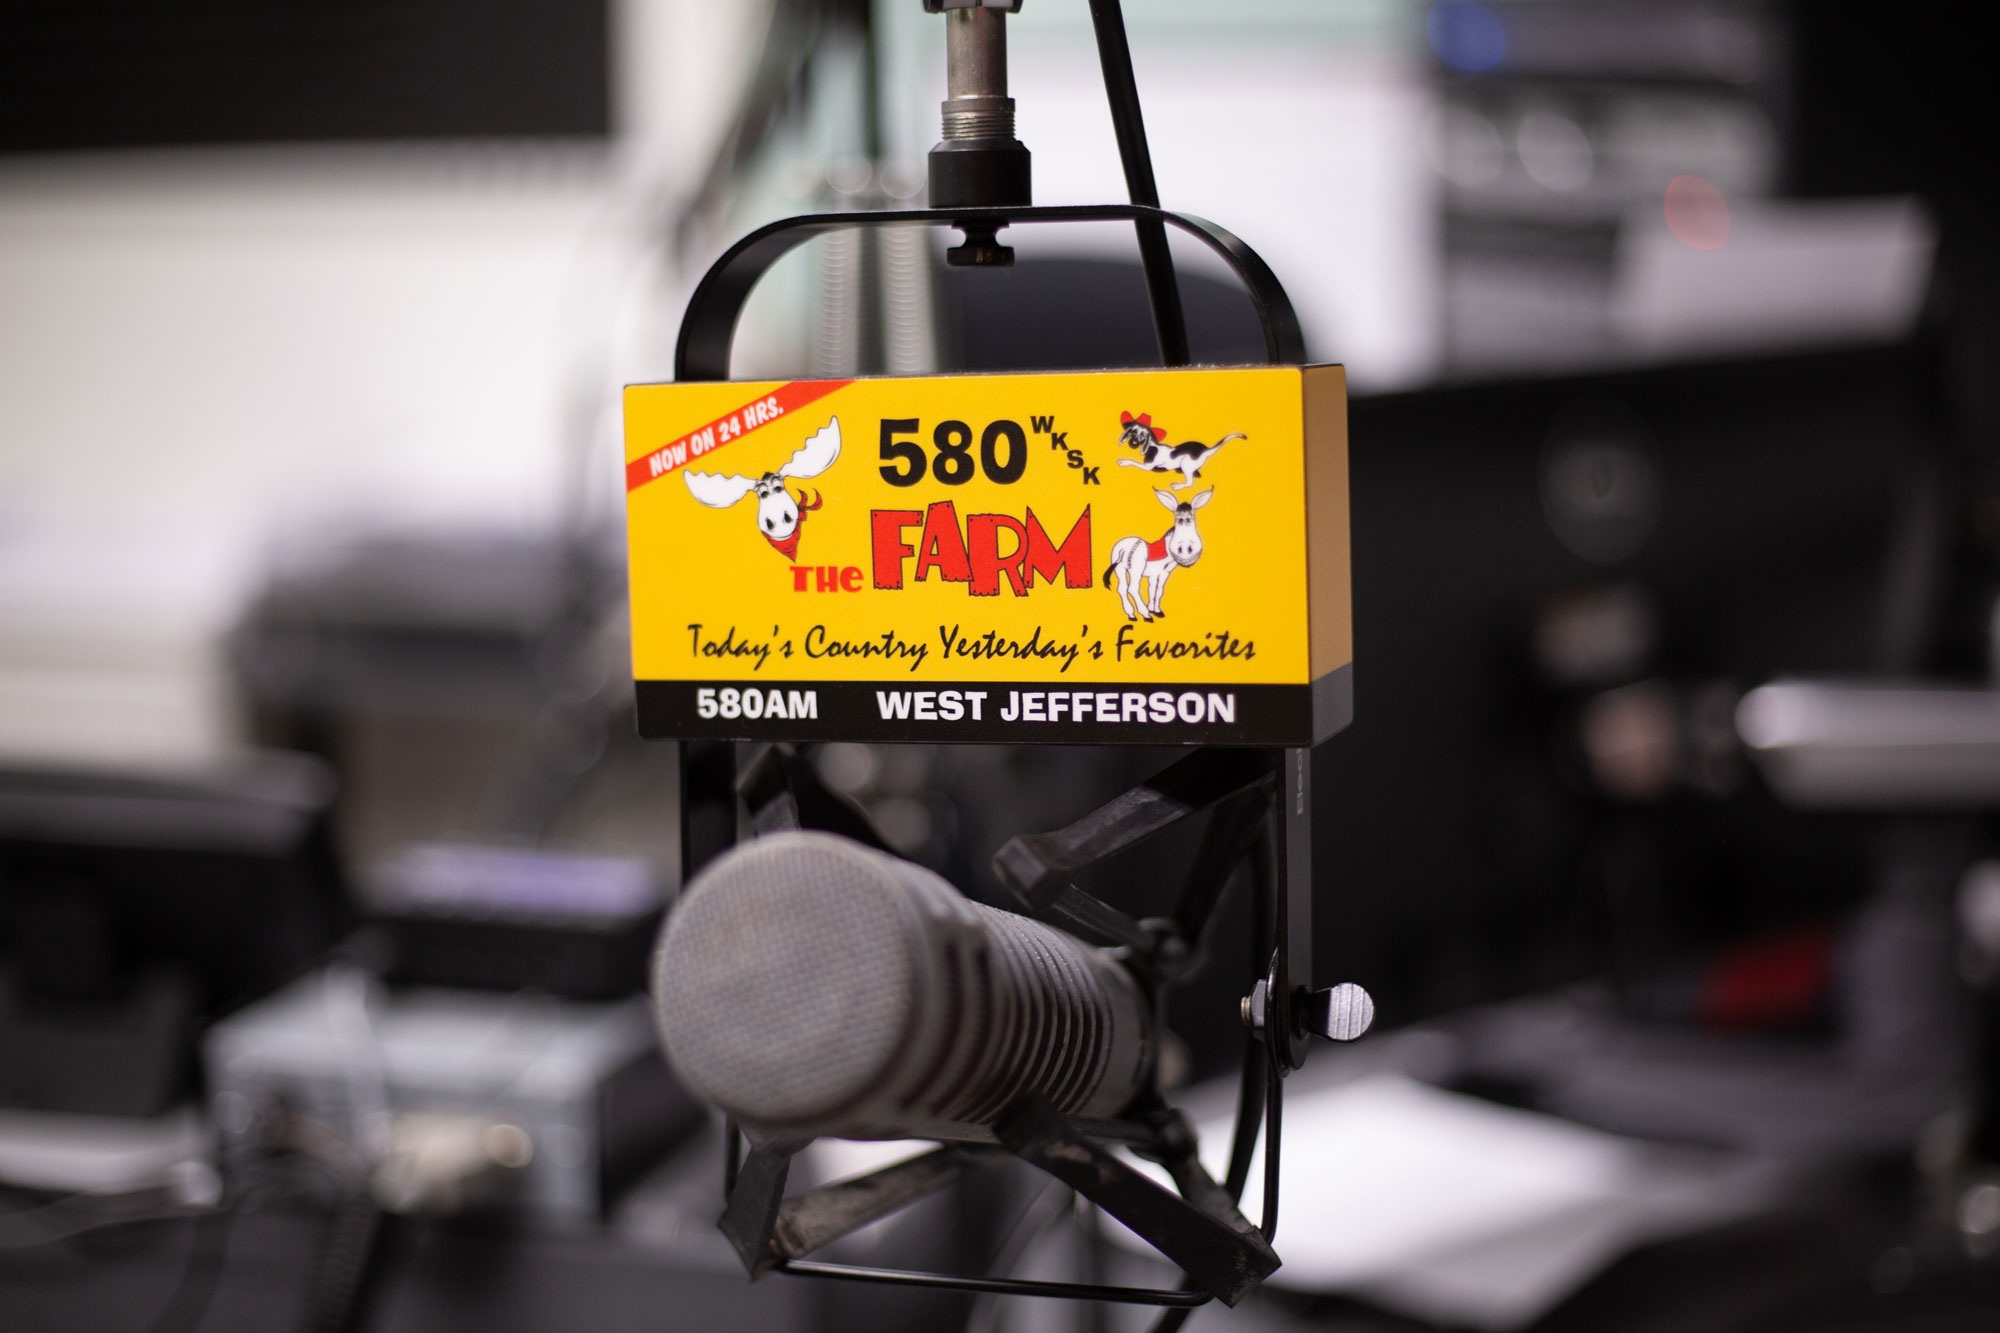 A microphone has a logo for a radio station called "The Farm" with a yellow background and moose cartoons